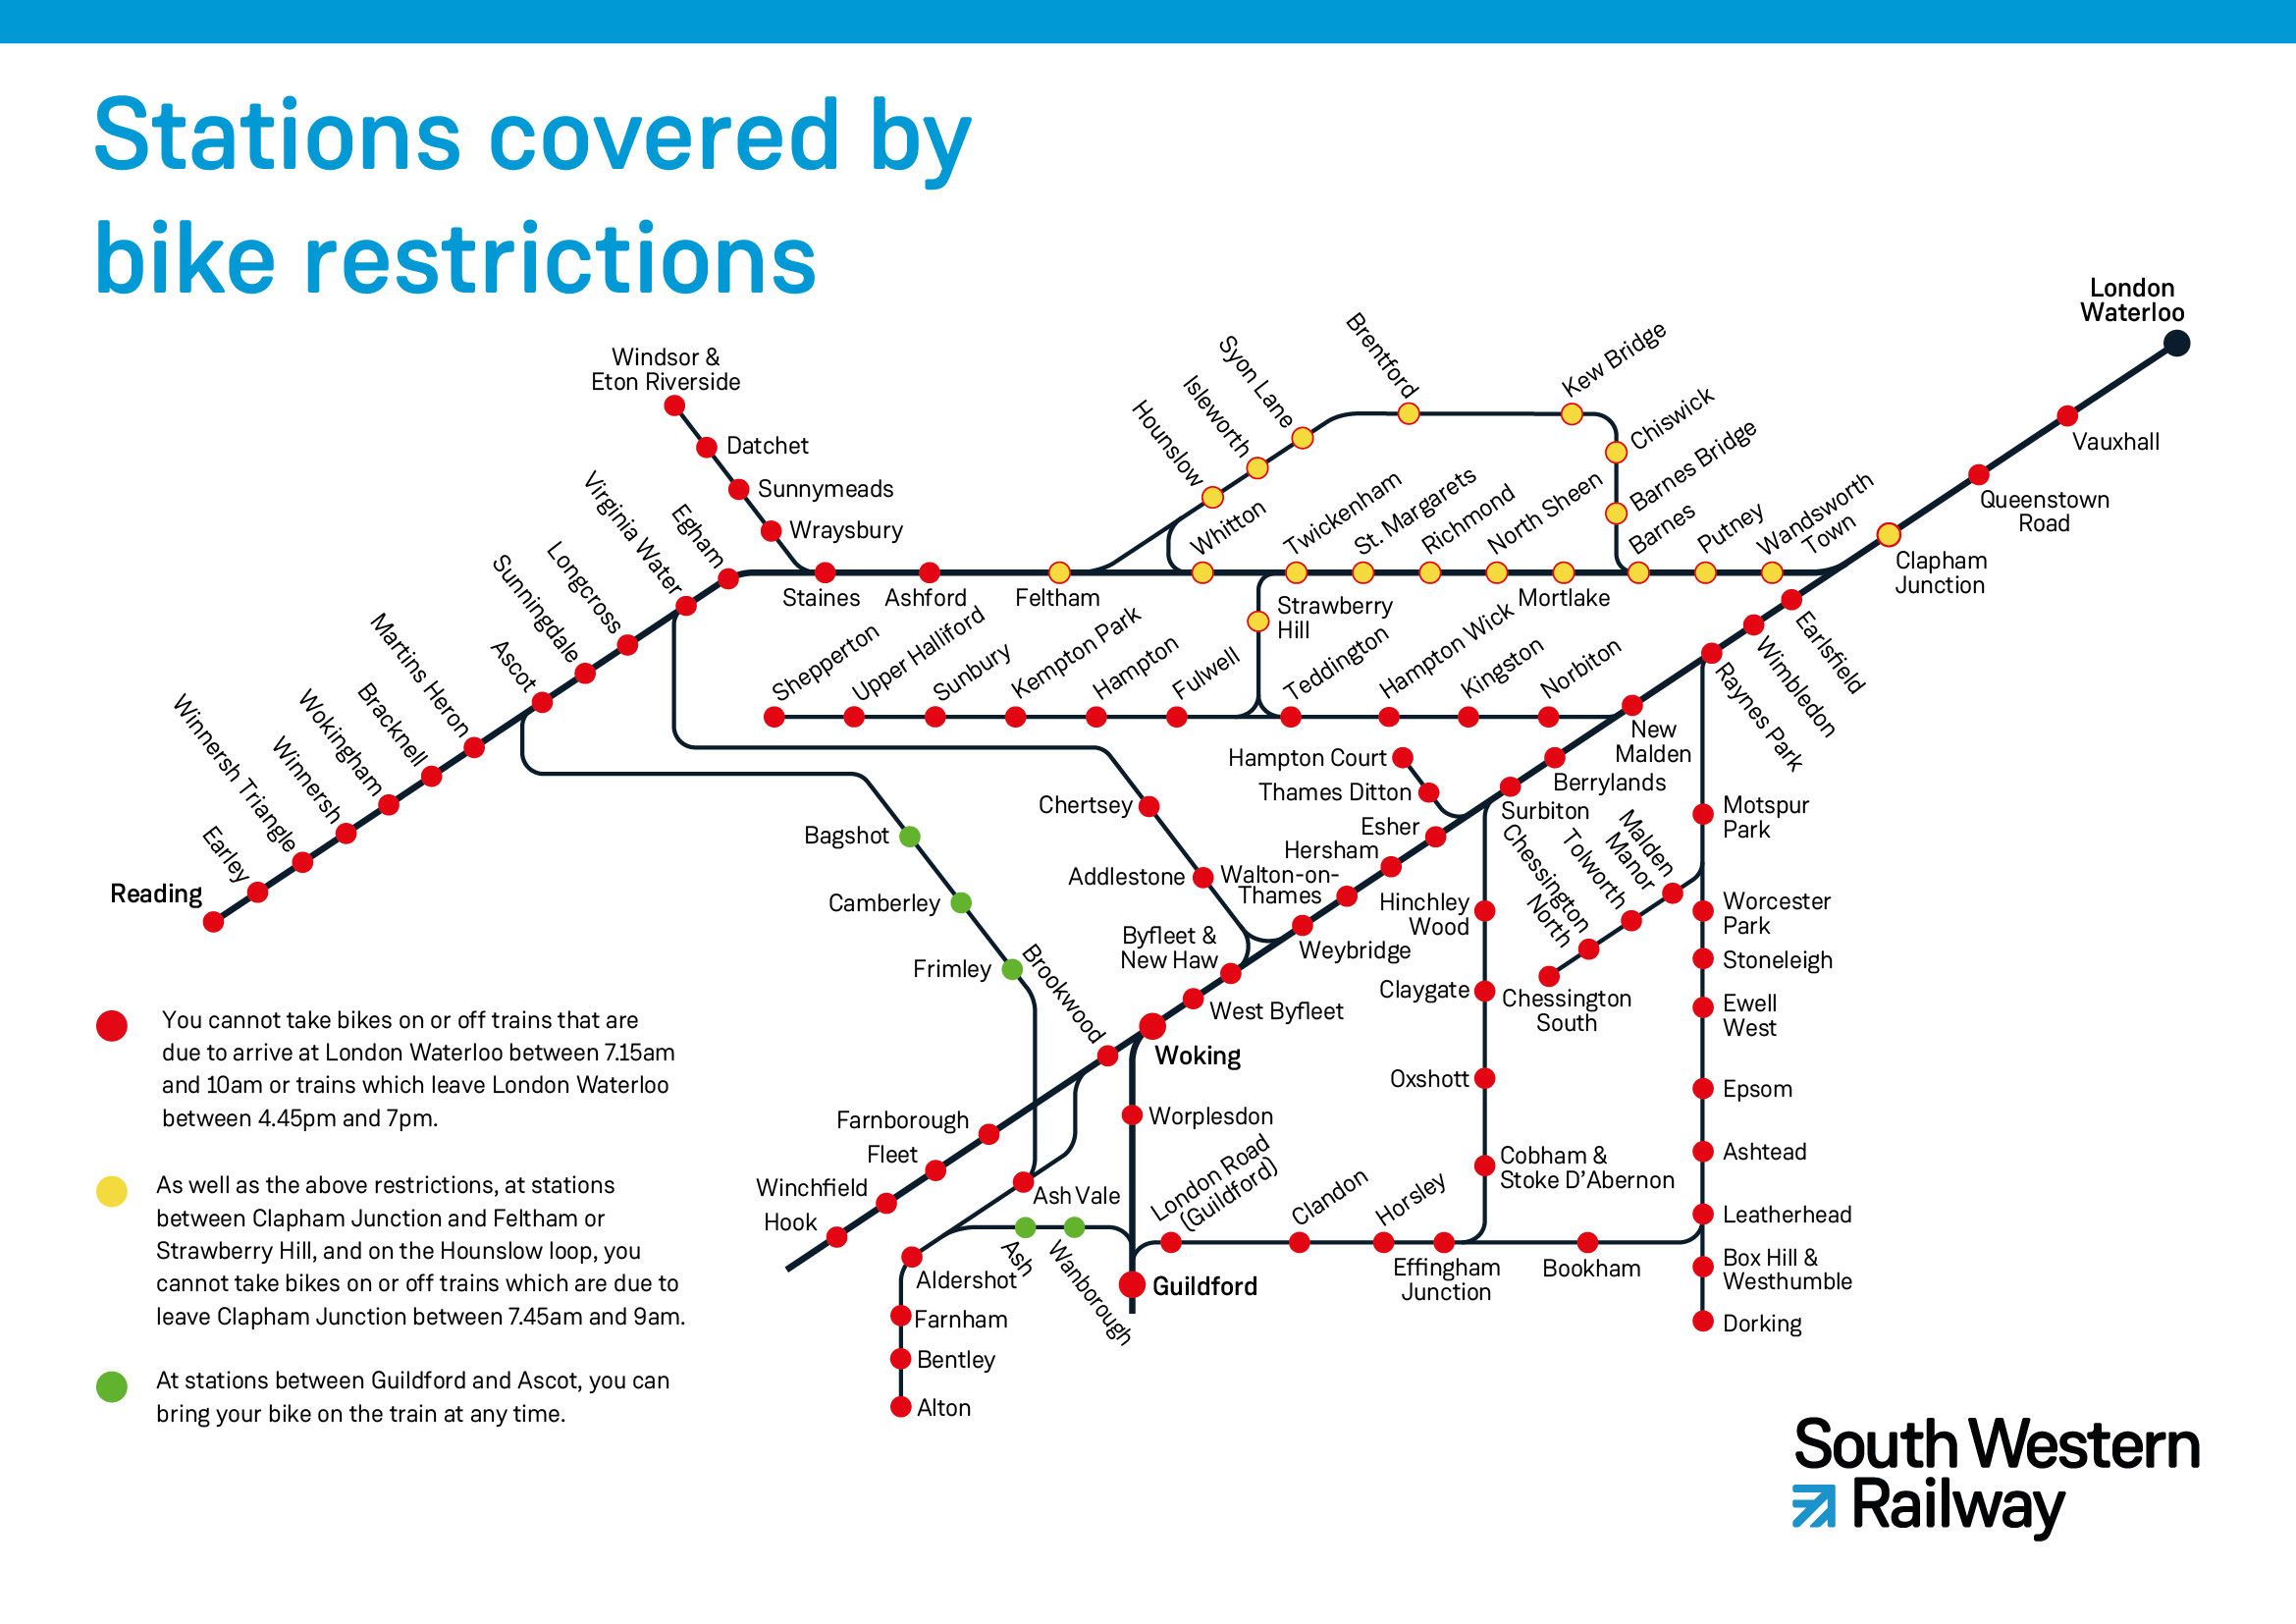 Stations served by South Western Railway covered by bike restrictions